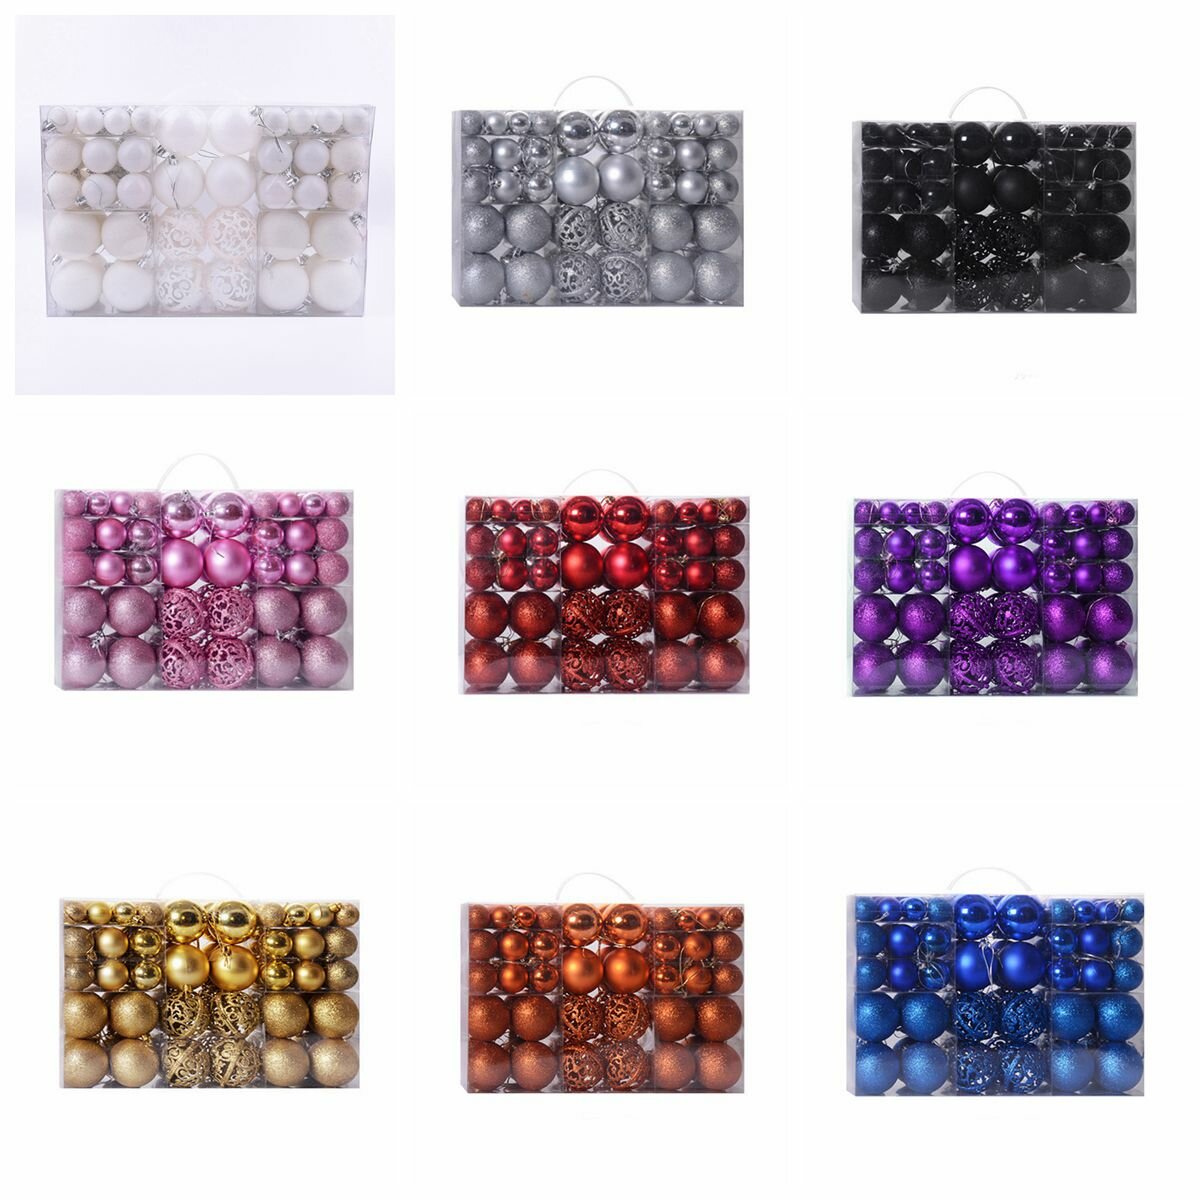 100pcs Decration Ball Set Christmas Tree Decorations Balls Bauble Pack Hanging Ball For Home Office Mall Ceiling Decor